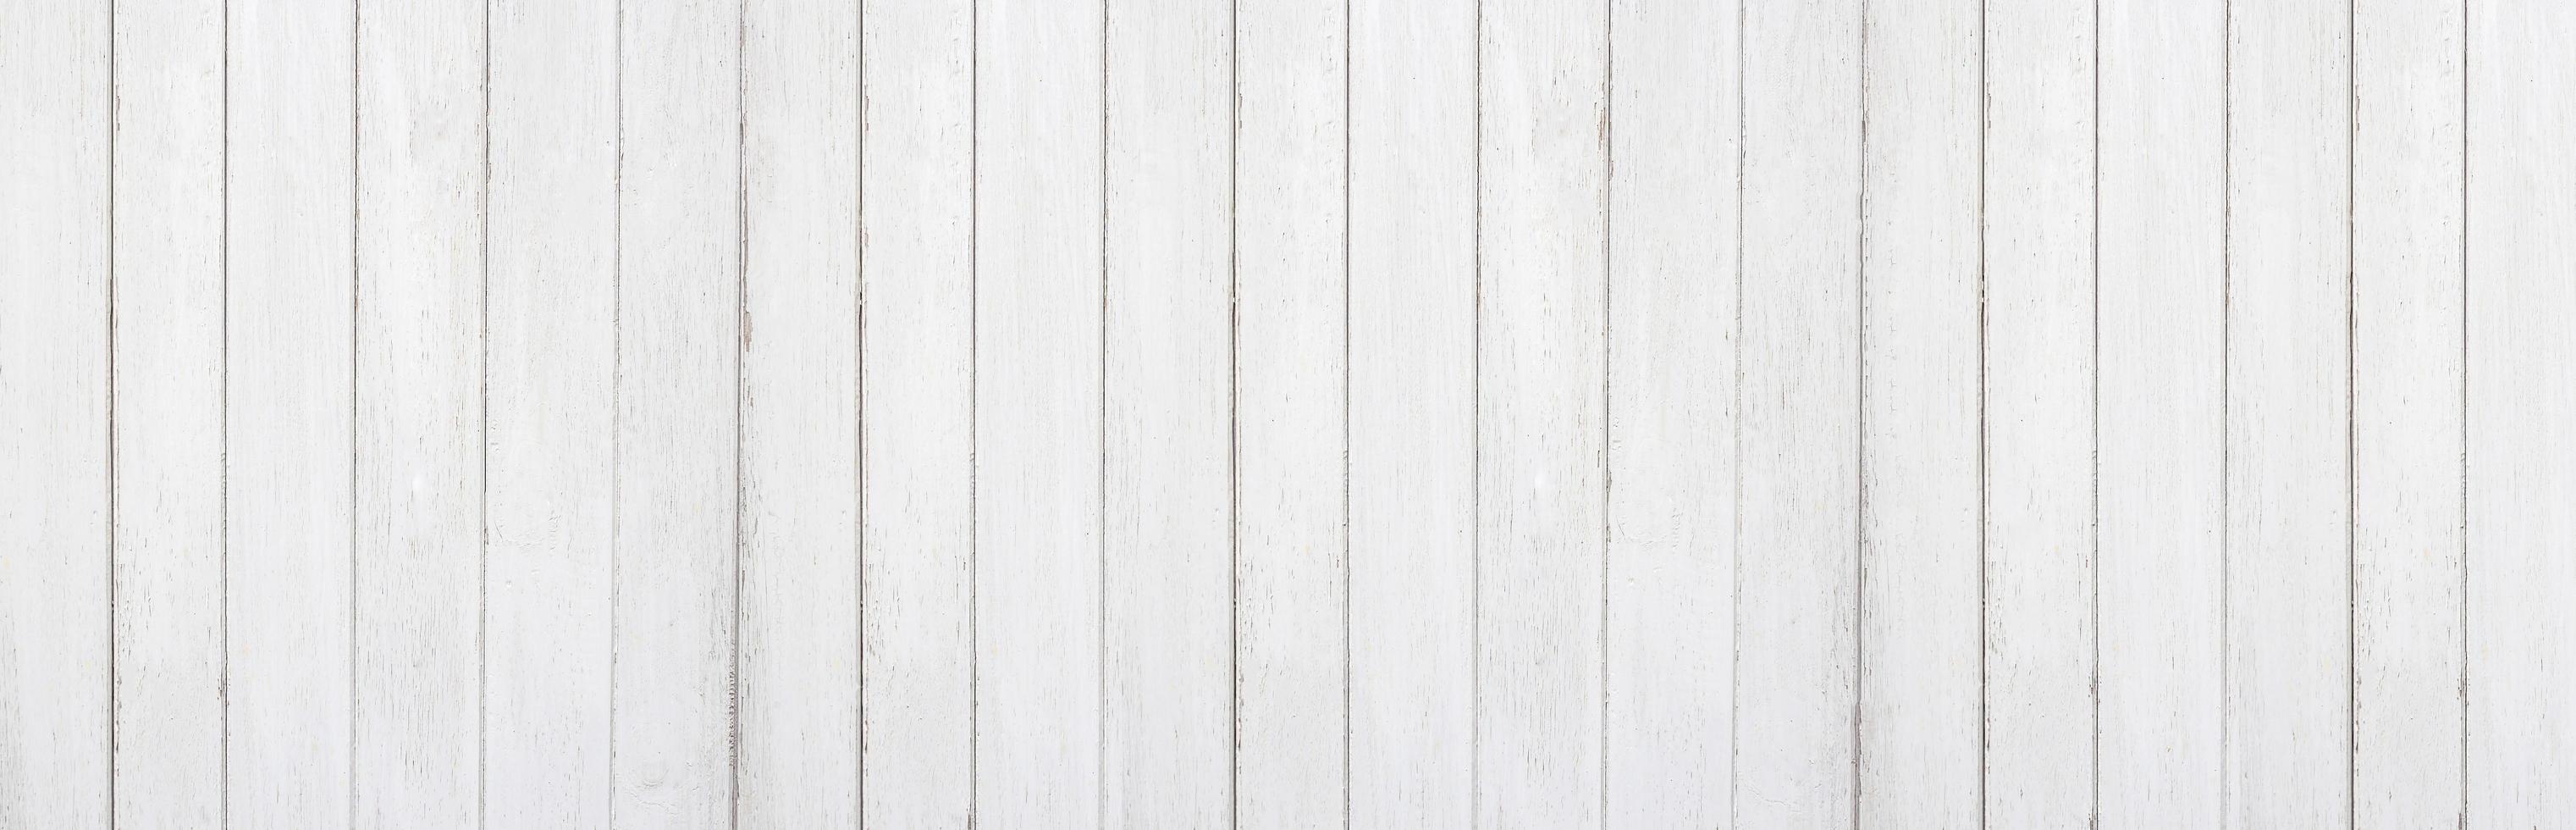 Panorama of Wood plank white timber texture and seamless background photo